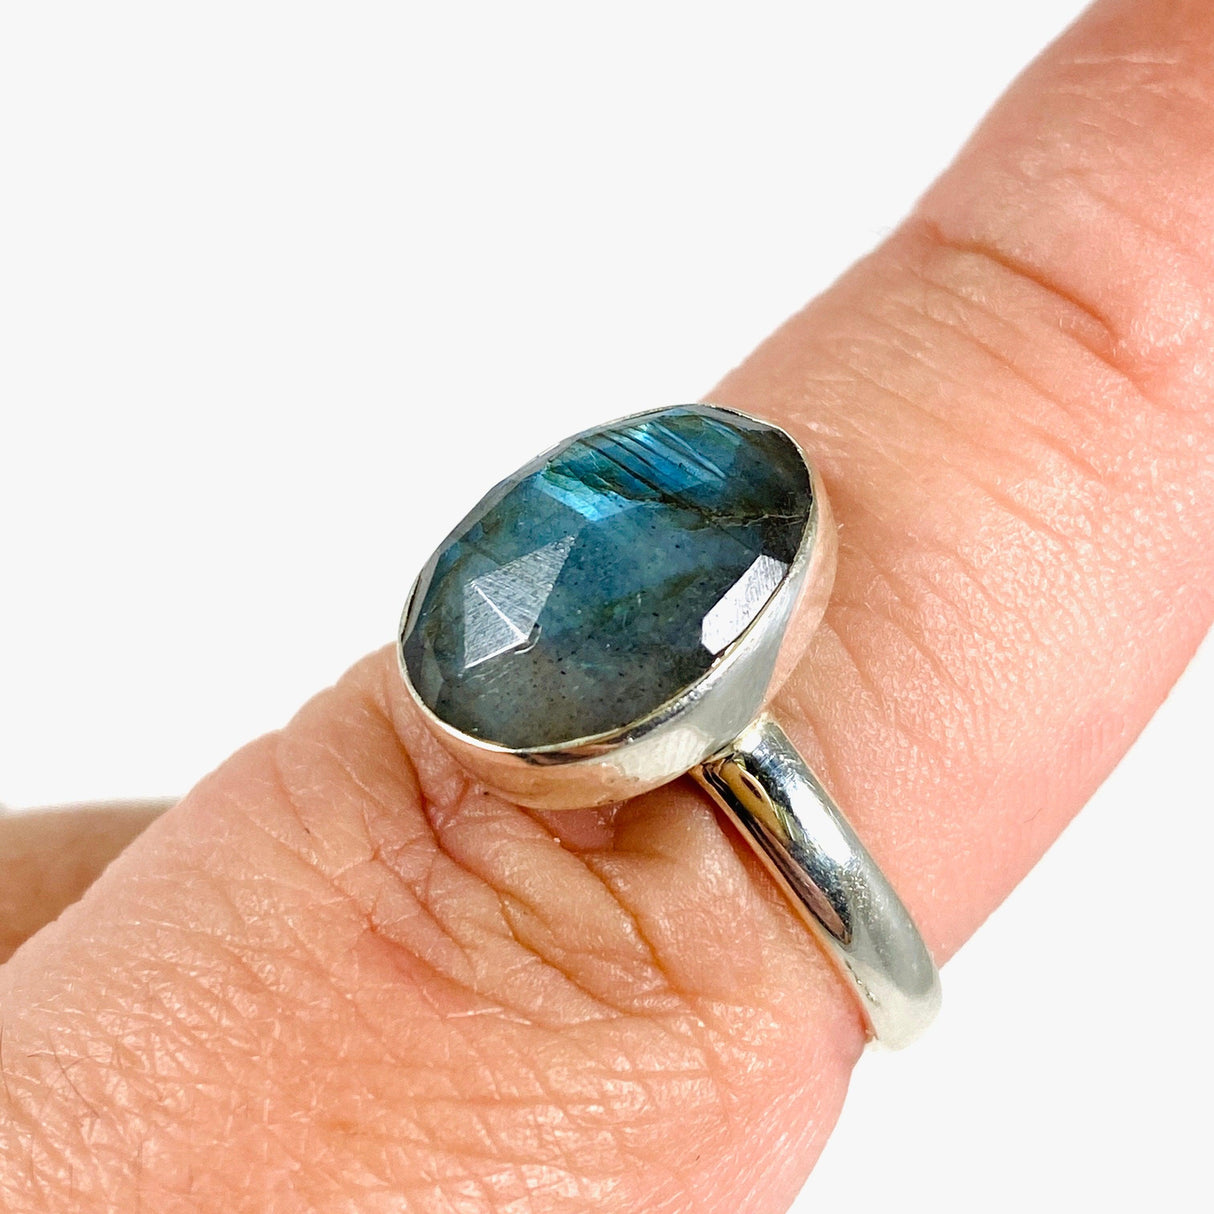  Blue iridescent Labradorite faceted gemstone and silver ring on a finger